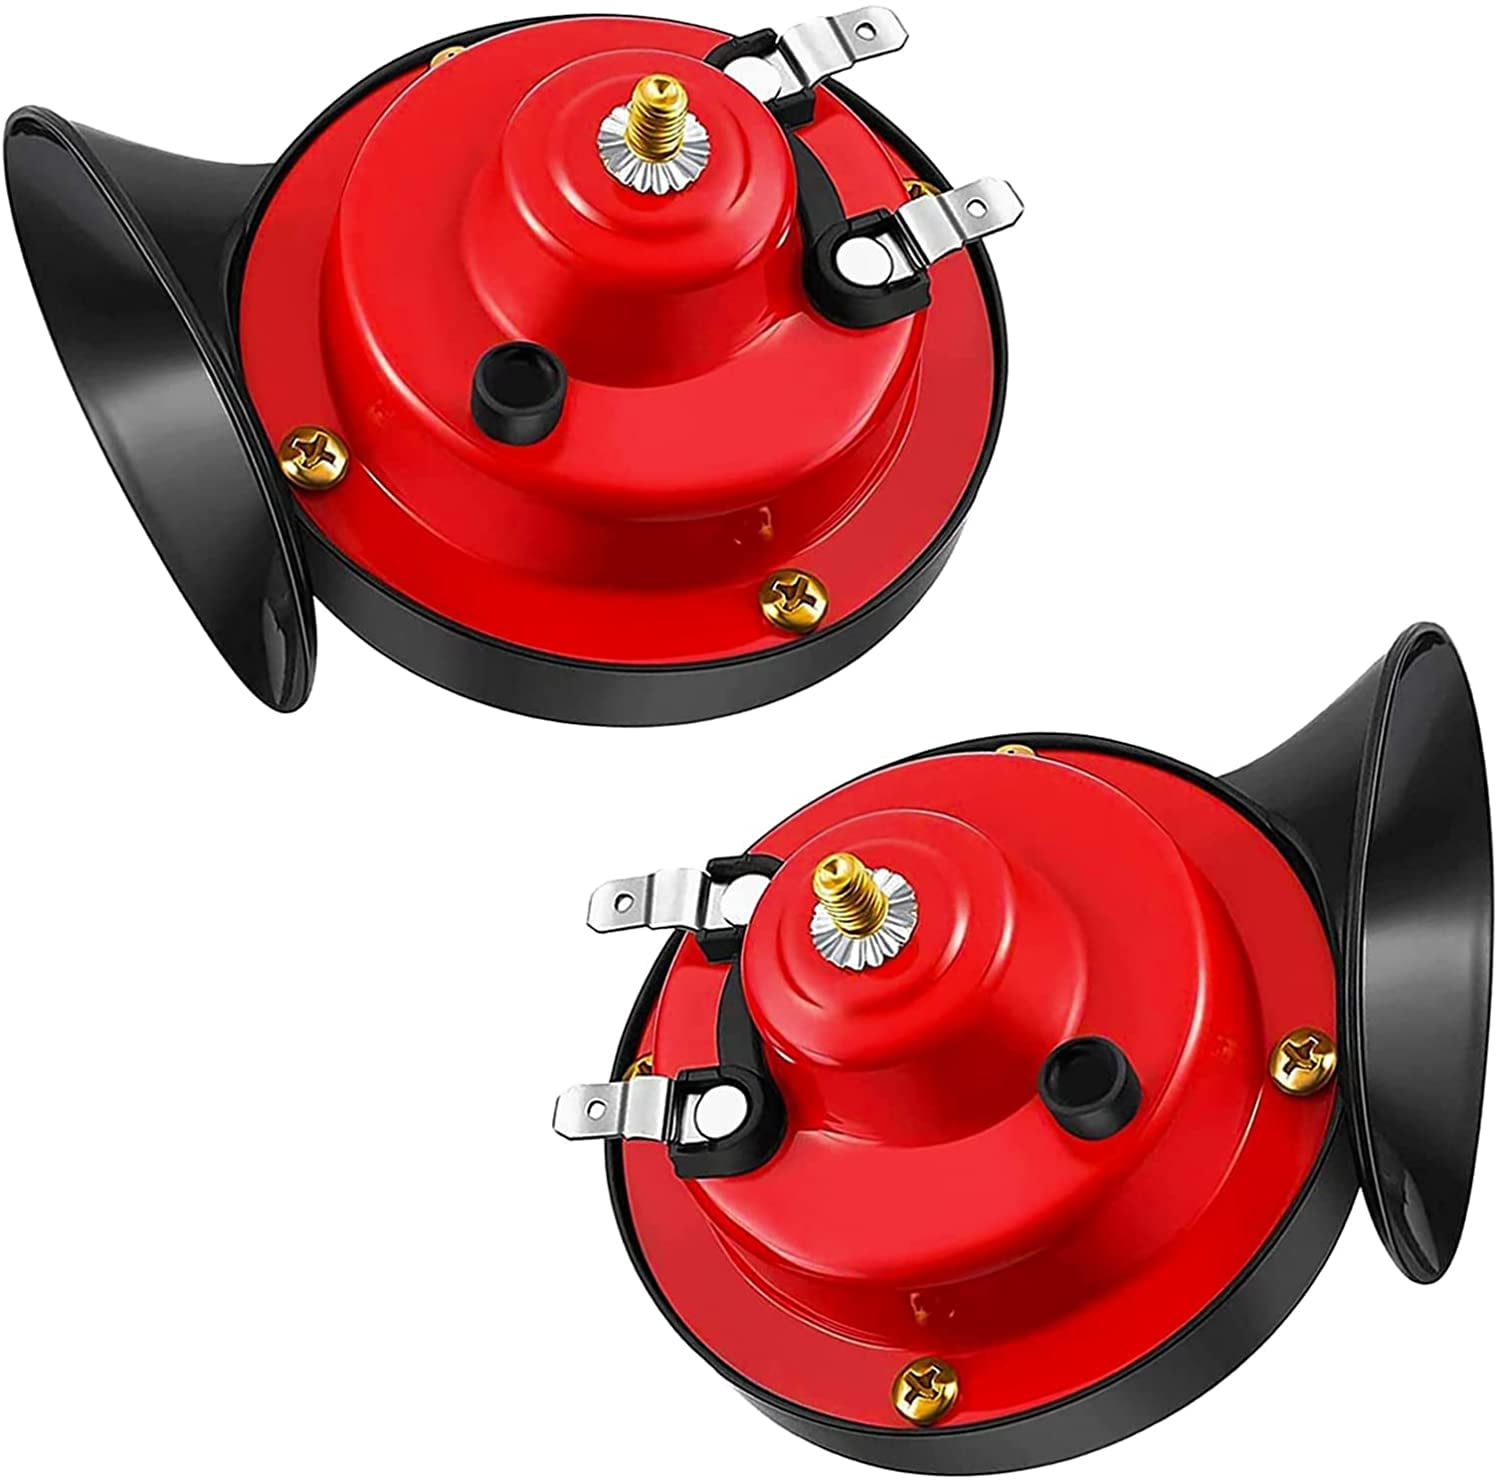 Dazone 2 Pack 12V 300DB Super Loud Train Air Horn Waterproof For Motorcycle  Car Truck SUV Boat, Double Horn Electric Raging Sound Snail Horn